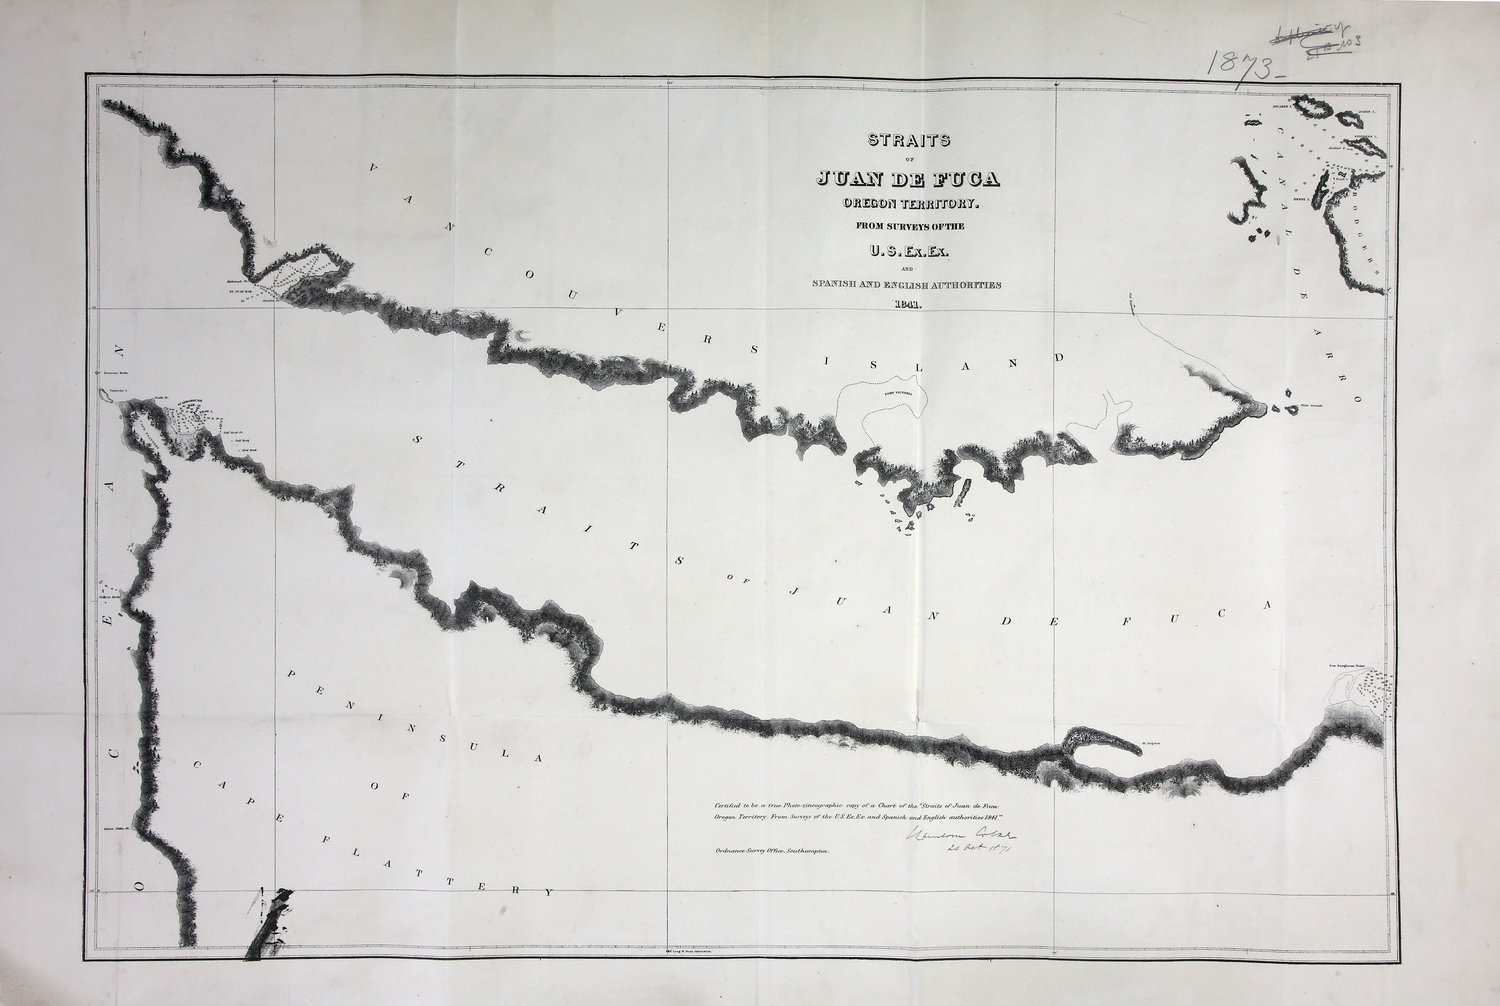 Straits of Juan de Fuca, Oregon Territory. From surveys of the U.S. Ex. Ex. and Spanish and English authorities